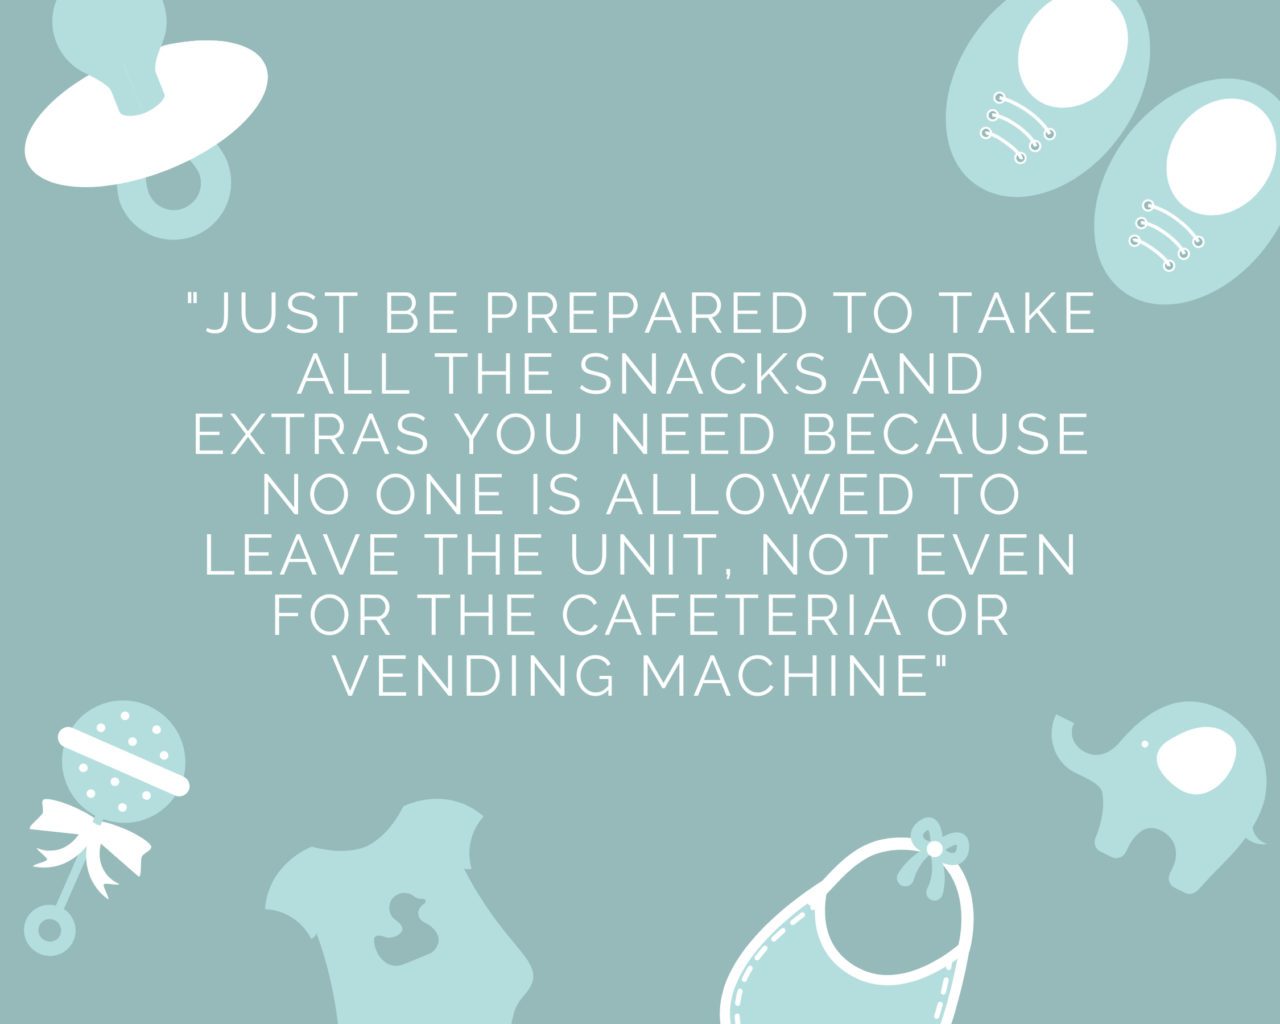 Just be prepared to take all the snacks and extras you need because noone else is allowed to leave the unit, not even for the cafeteria or vending machine